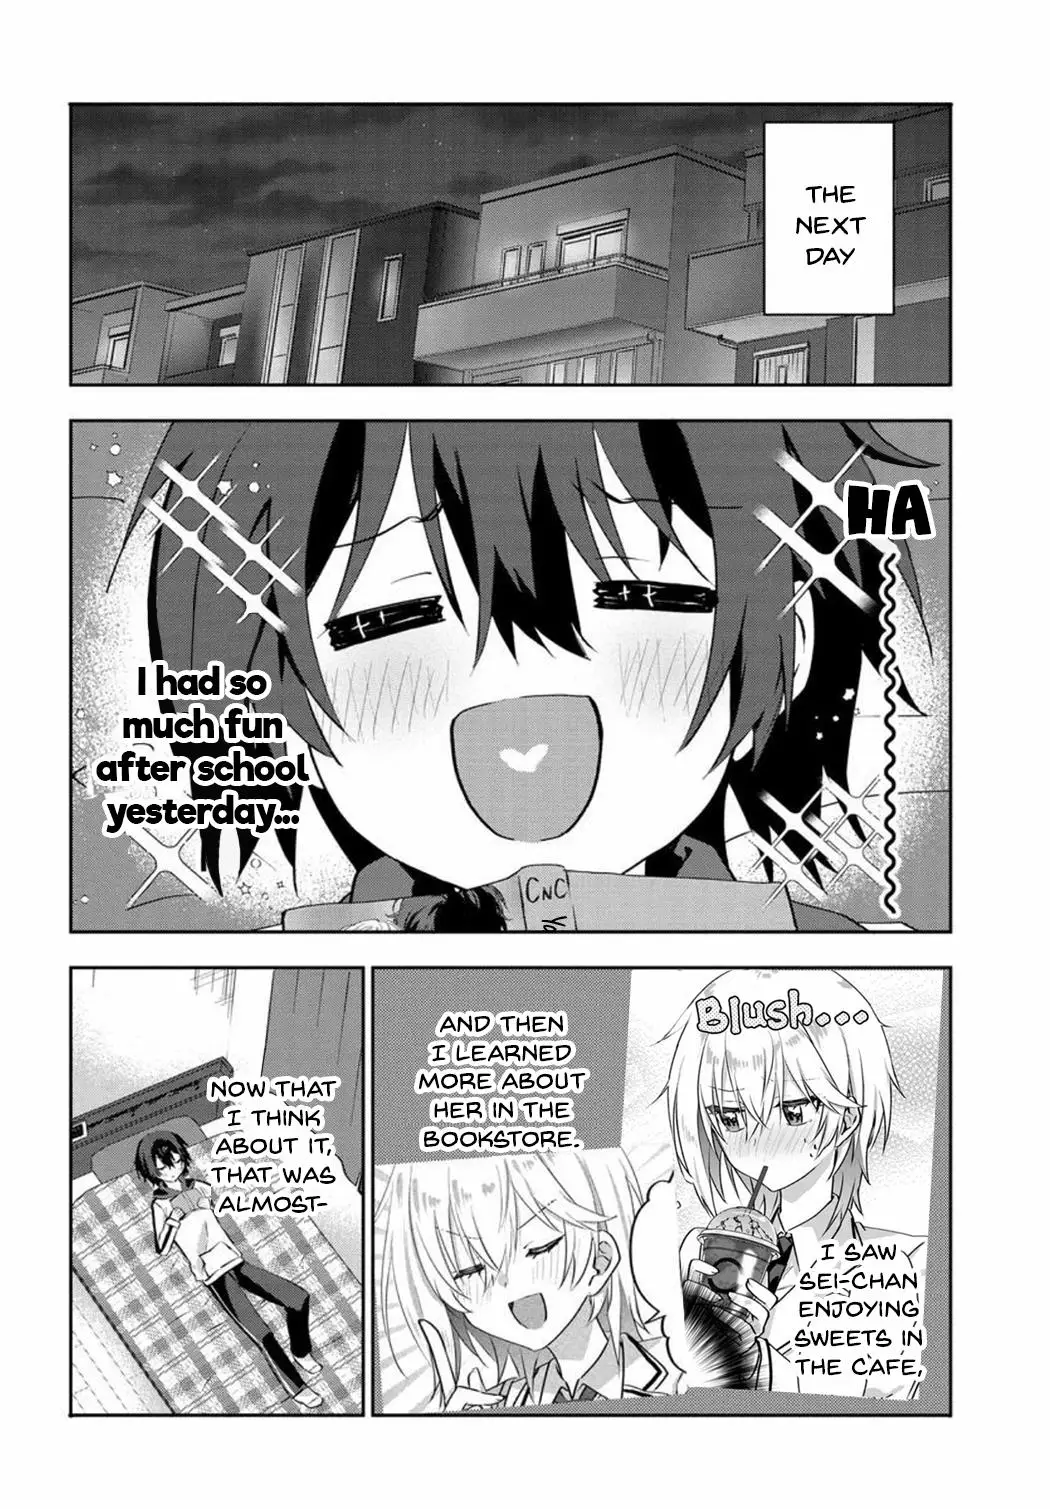 Since I’Ve Entered The World Of Romantic Comedy Manga, I’Ll Do My Best To Make The Losing Heroine Happy - 5.2 page 4-11d1edb4